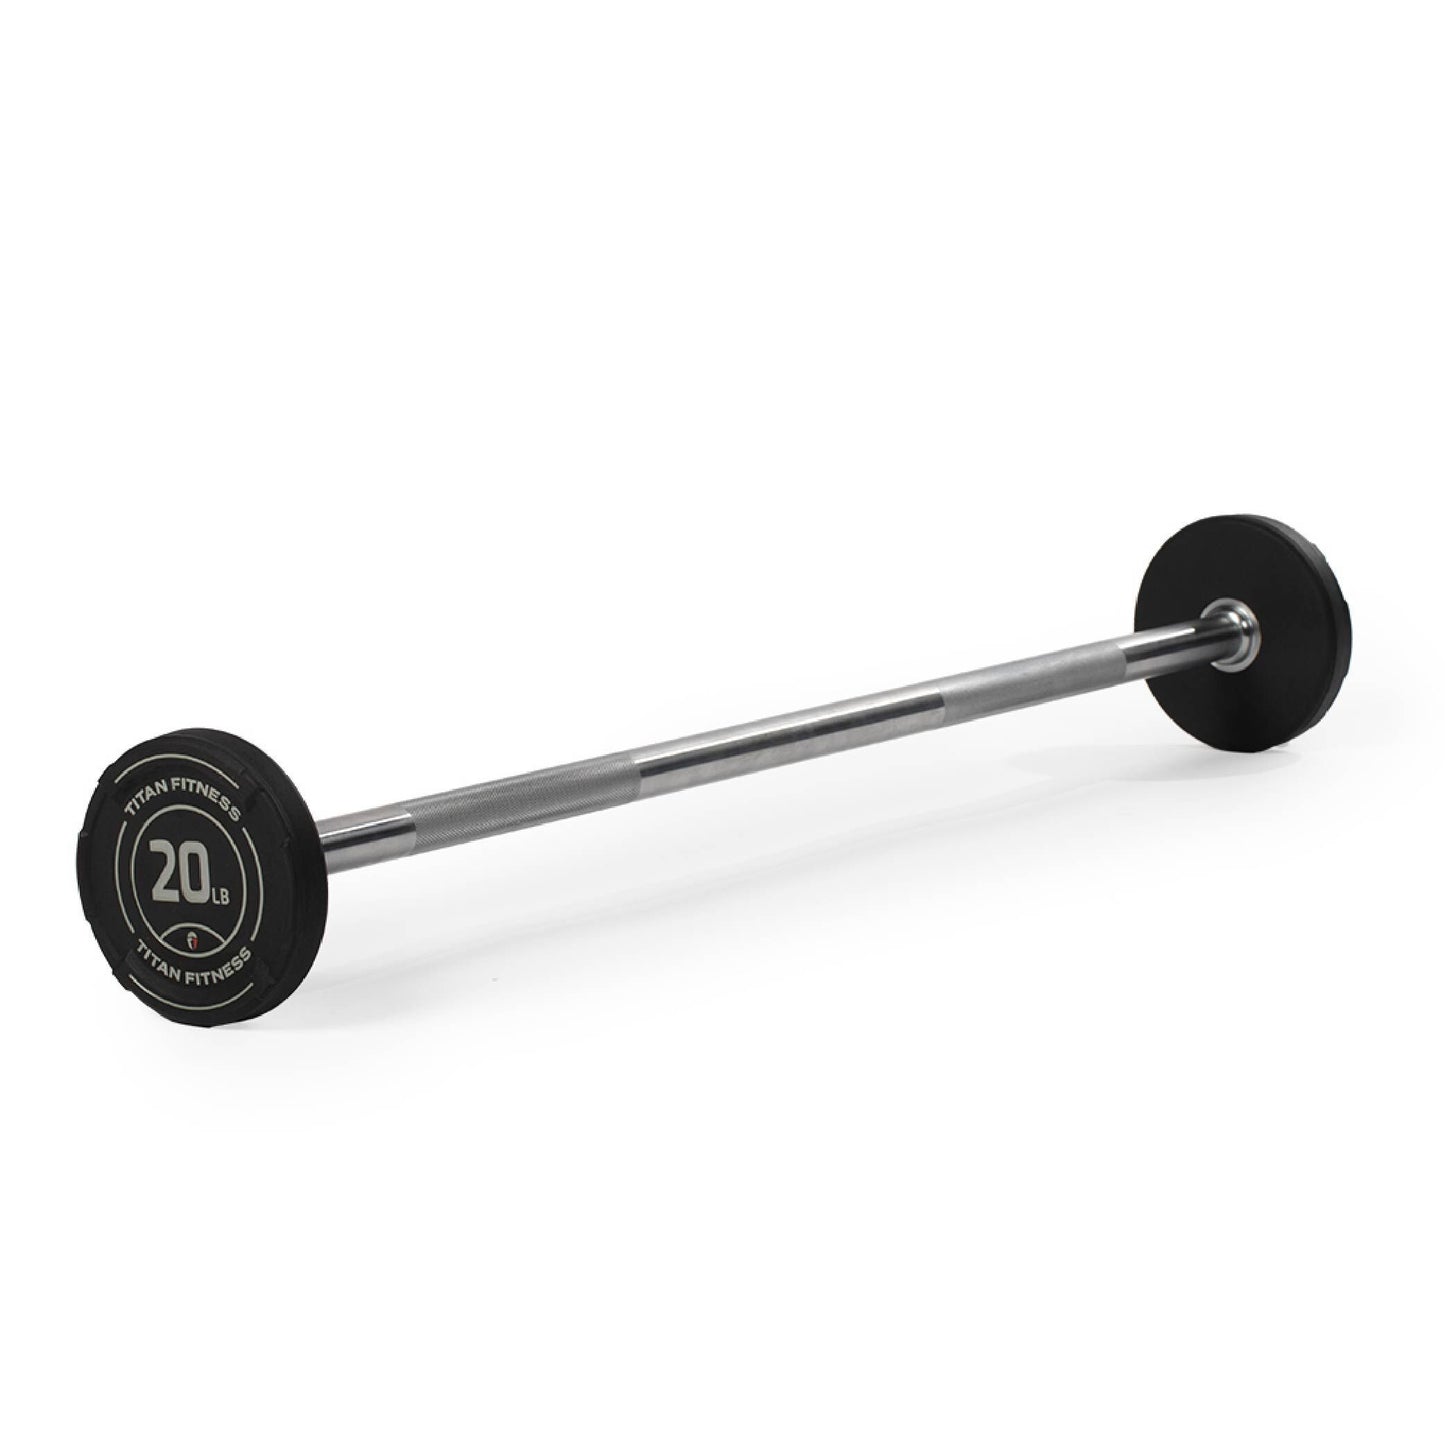 20 LB Straight Fixed Rubber Barbell - view 1